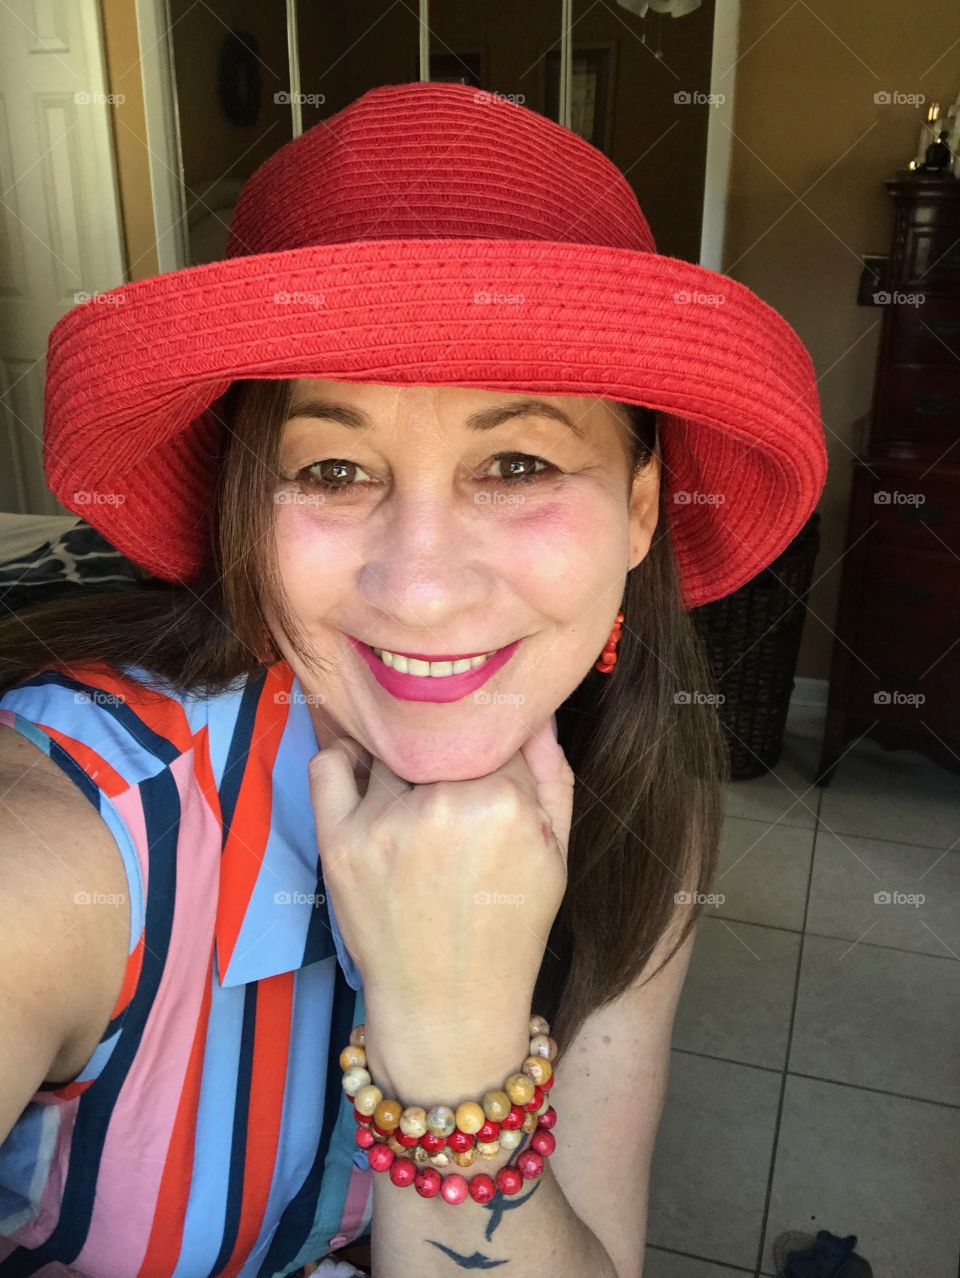 A smiling lady posing, she is wearing colorful red hat and a striped dress,red lipsticks and natural jewelry.